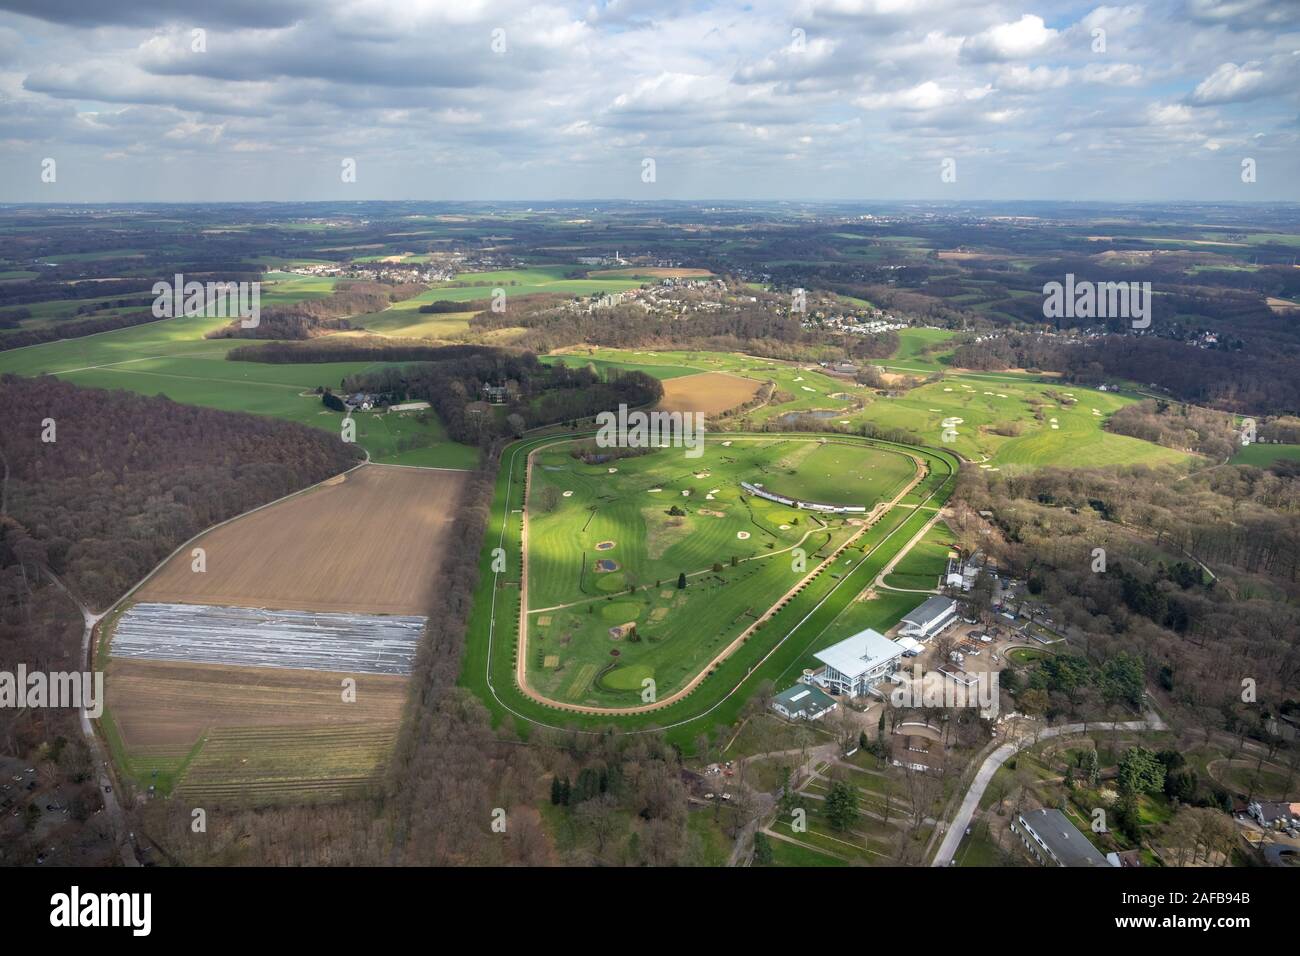 Golfplatz High Resolution Stock Photography and Images - Alamy